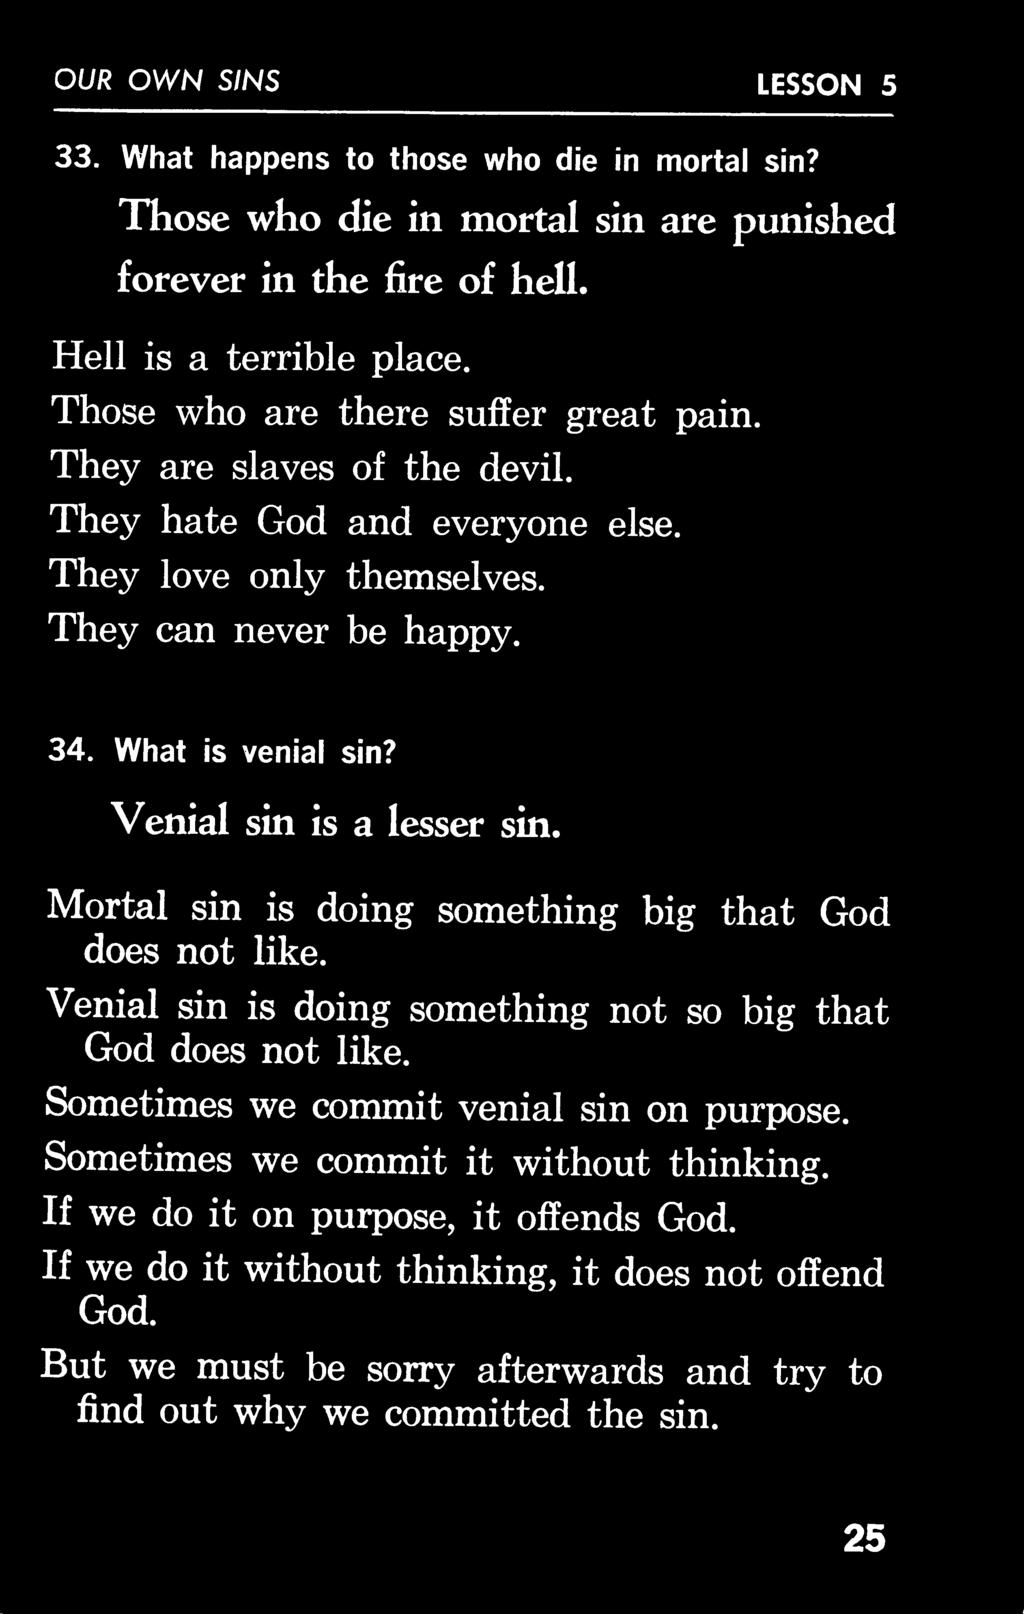 OUR OWN SINS LESSON 5 33. What happens to those who die in mortal sin? Those who die in mortal sin are punished forever in the fire of hell. Hell is a terrible place.